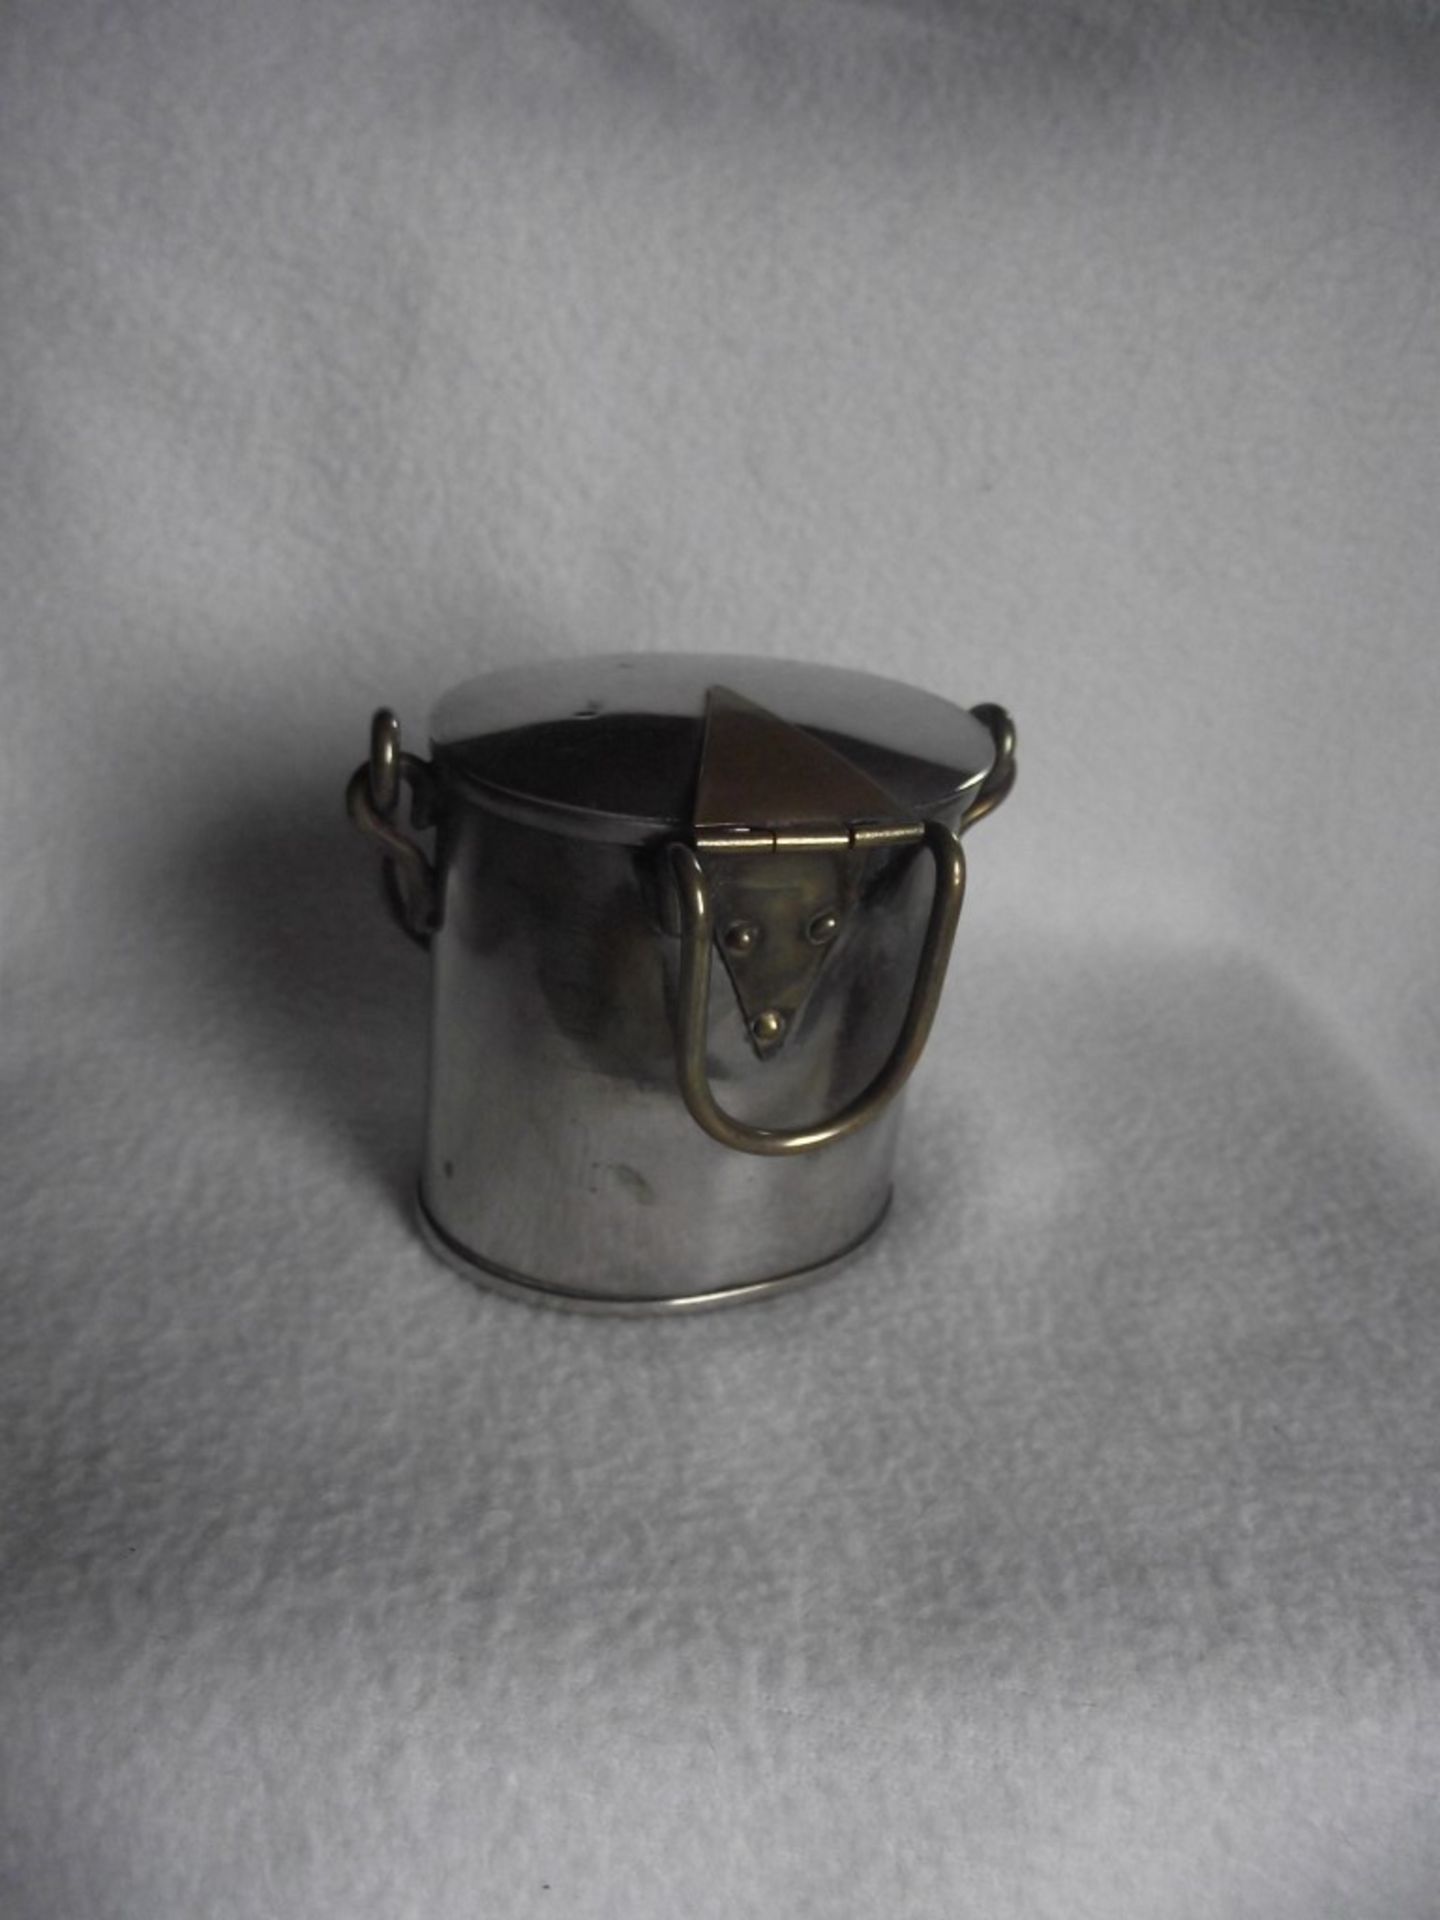 Antique Victorian Novelty Table Vesta Case - Silver Plated Brass Milk Pail - Ca.1890's - Image 4 of 20